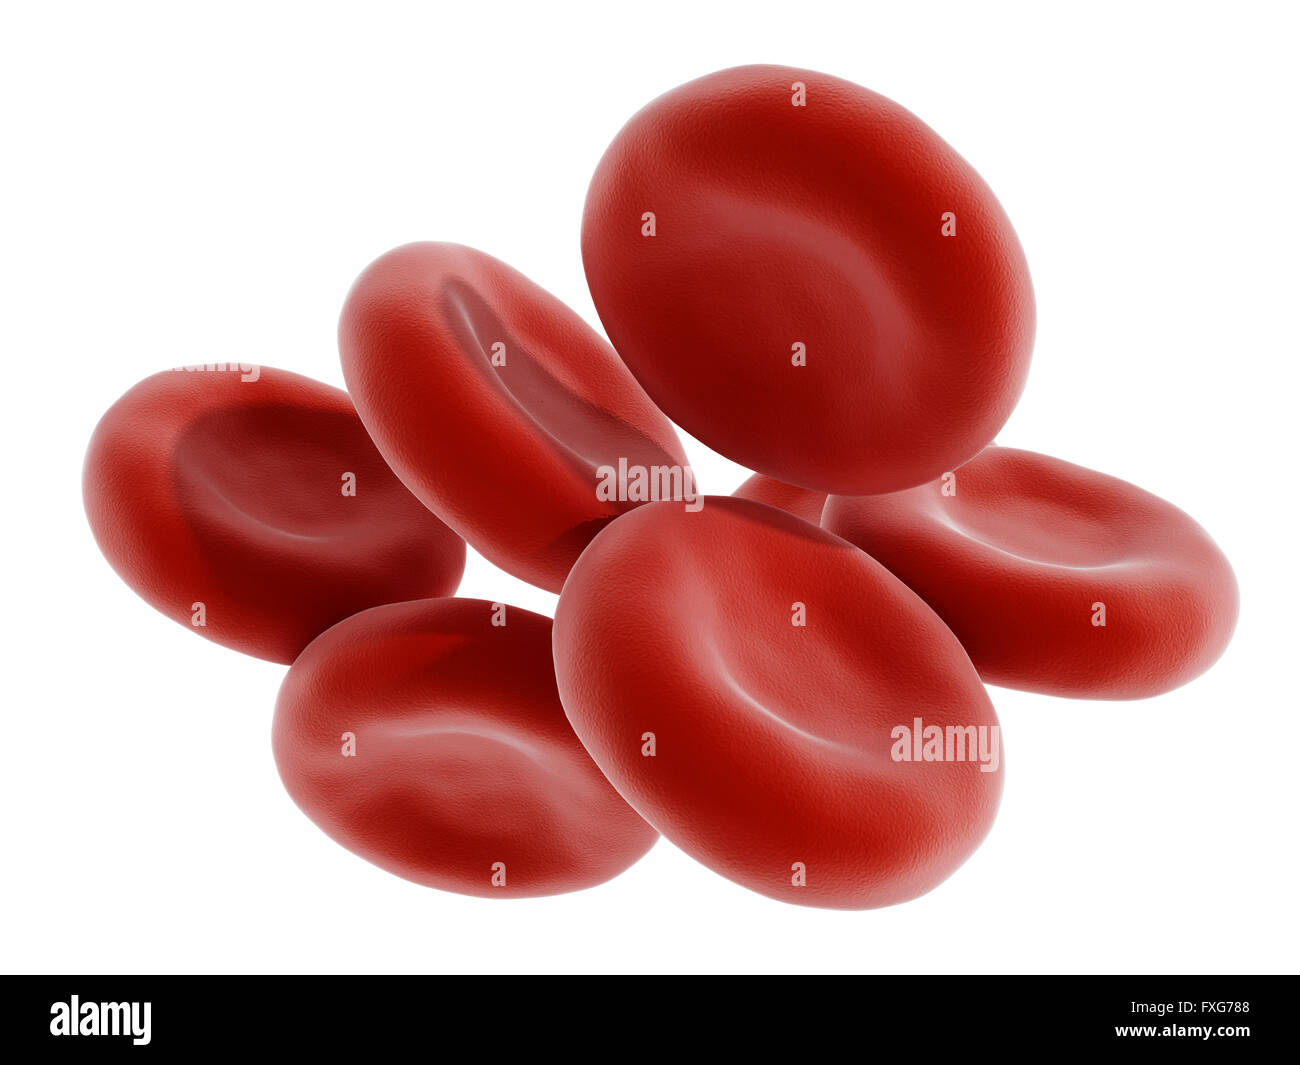 Red blood cell isolated on white background Stock Photo